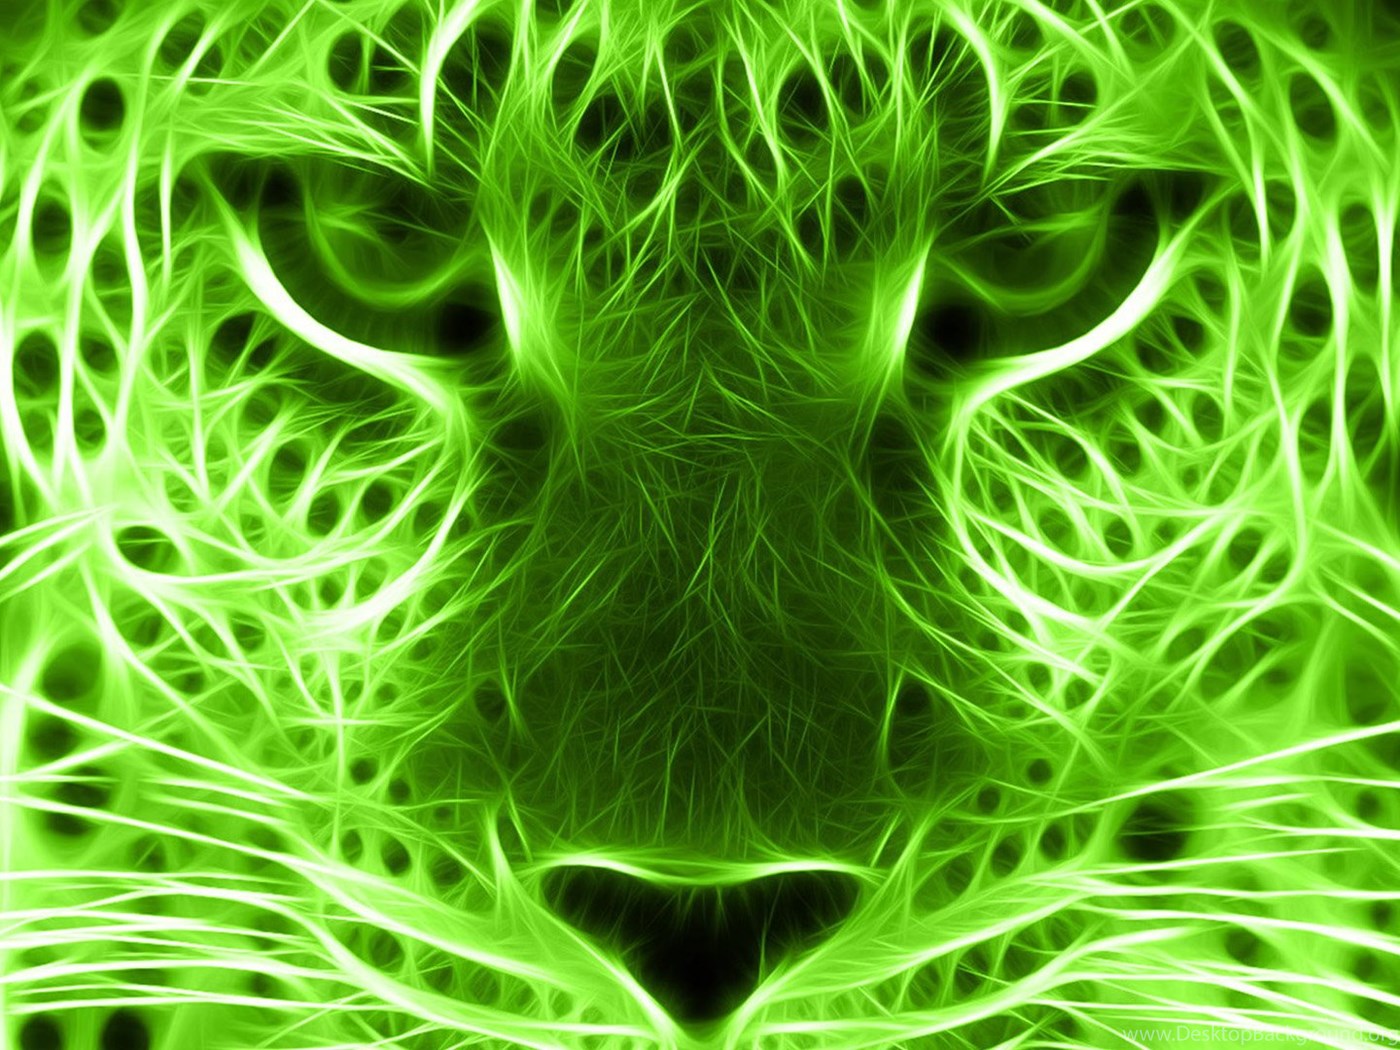 https://www.desktopbackground.org/download/1400x1050/2015/12/09/1054854_green-3d-leopard-wallpaper-green-backgrounds-pictures-and-images_1920x1080_h.jpg